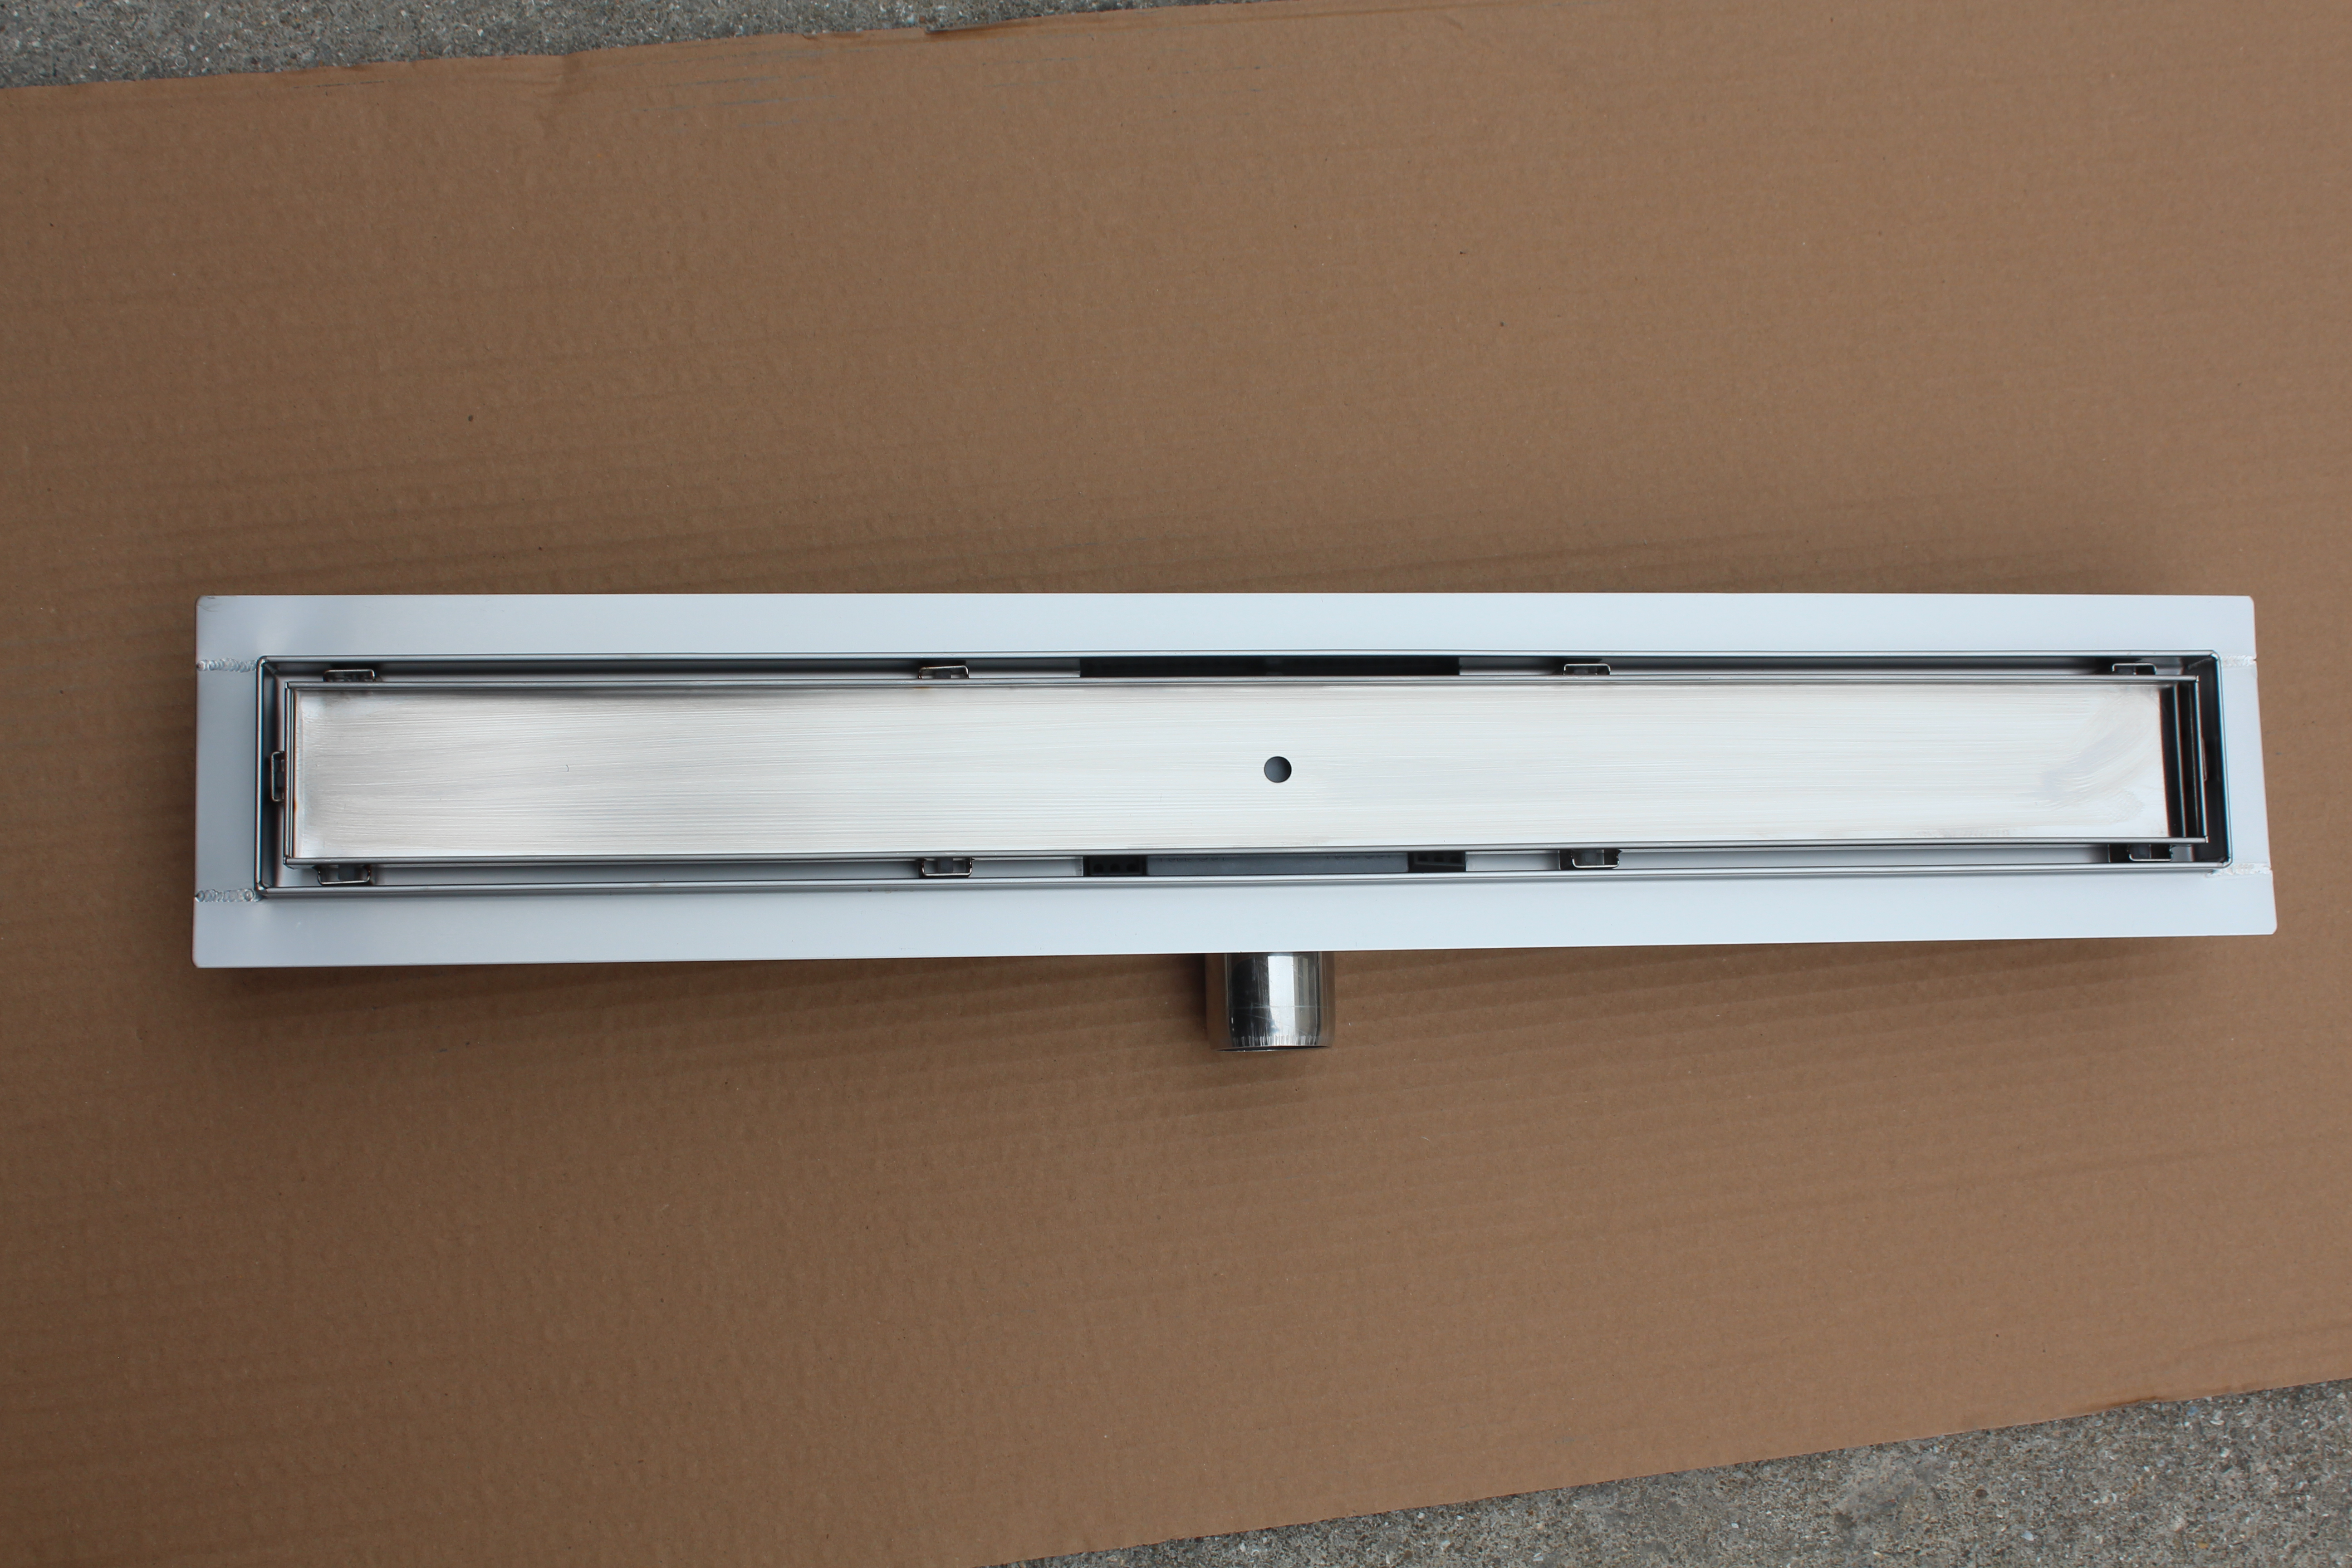 Low Moq For Drain Grate Factory Linear Drain 304 Stainless Steel